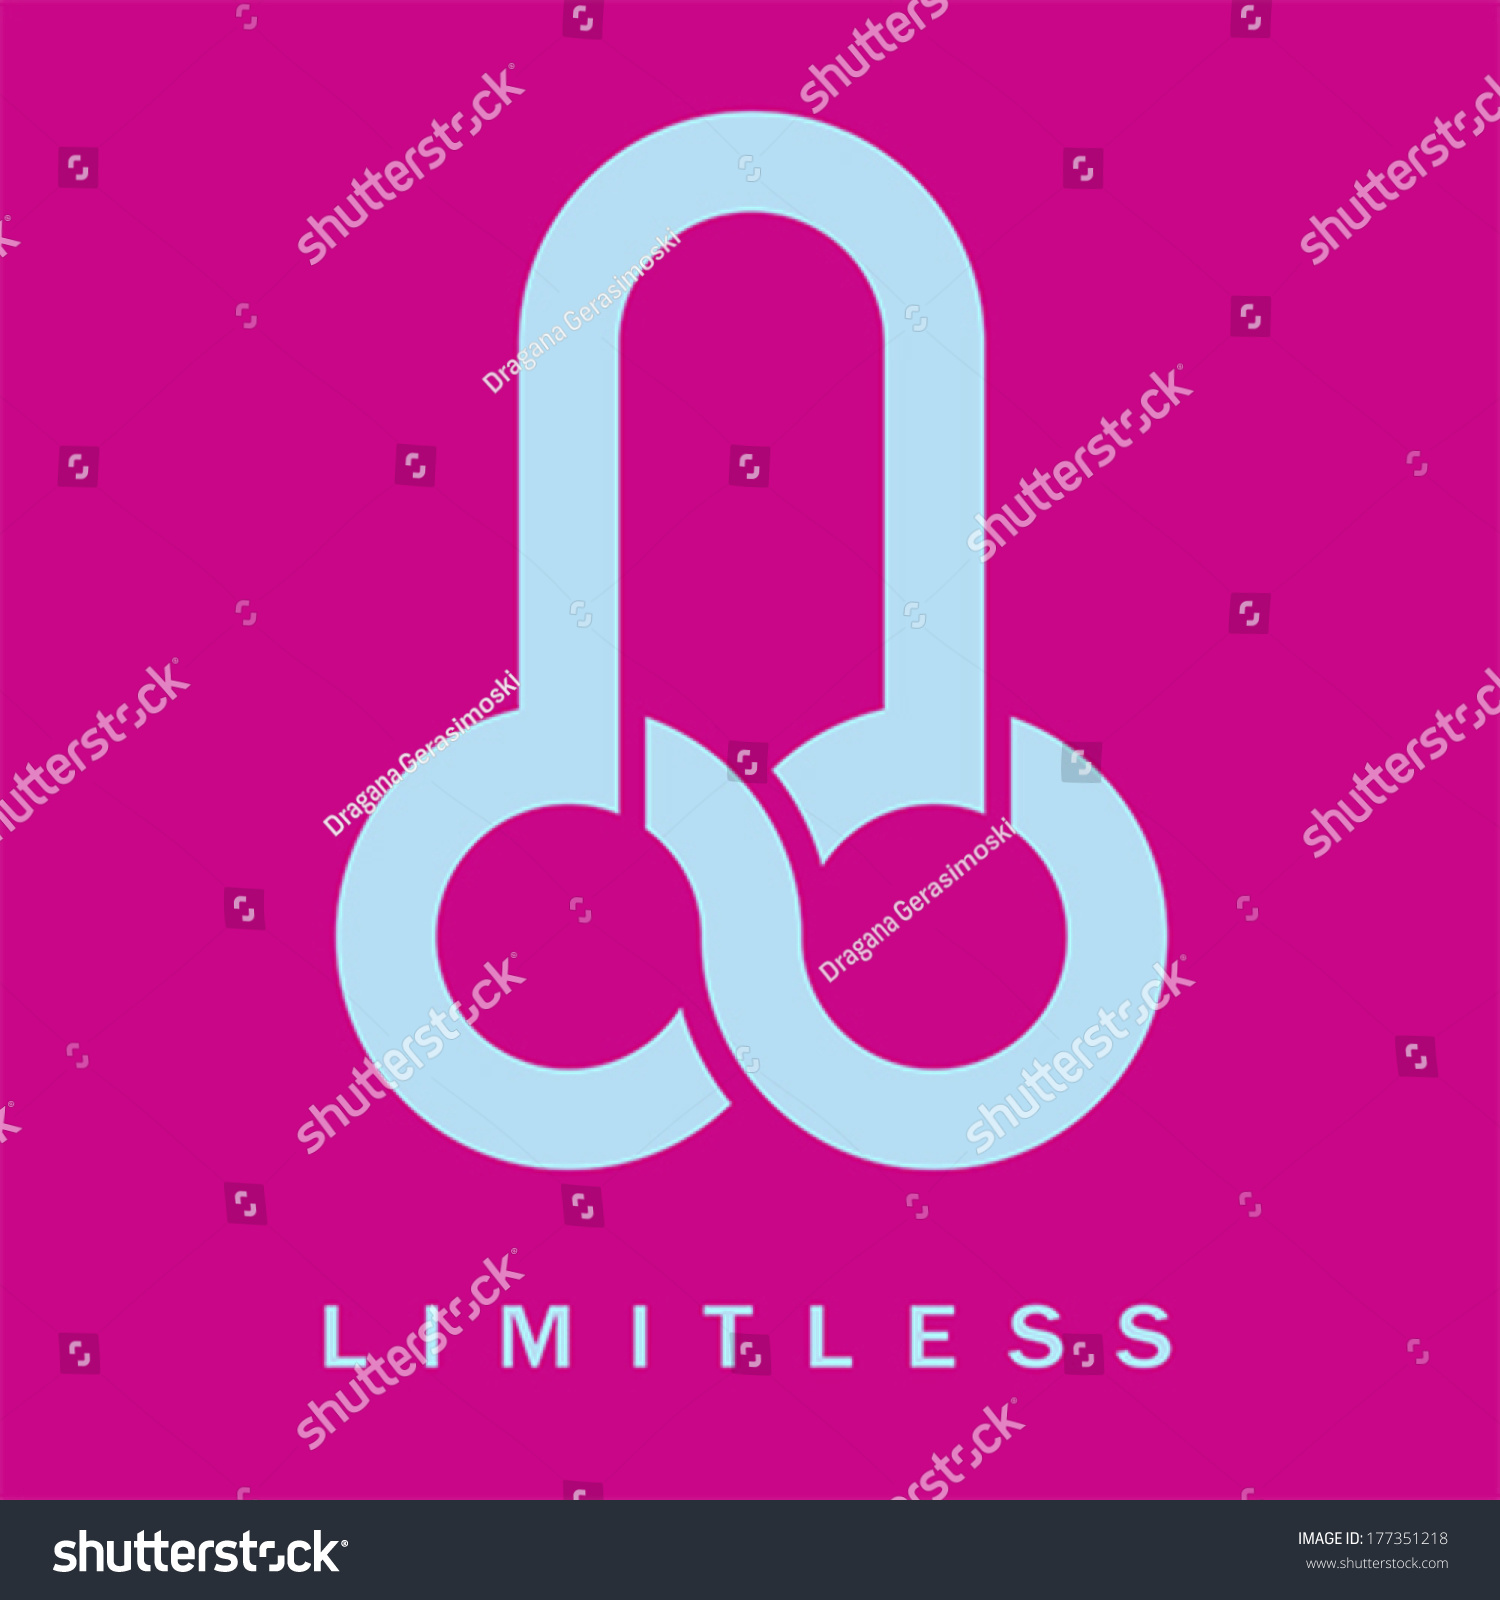 Penis Limitless Symbol Icon Vector Stock Vector Royalty Free 177351218 Shutterstock 8256